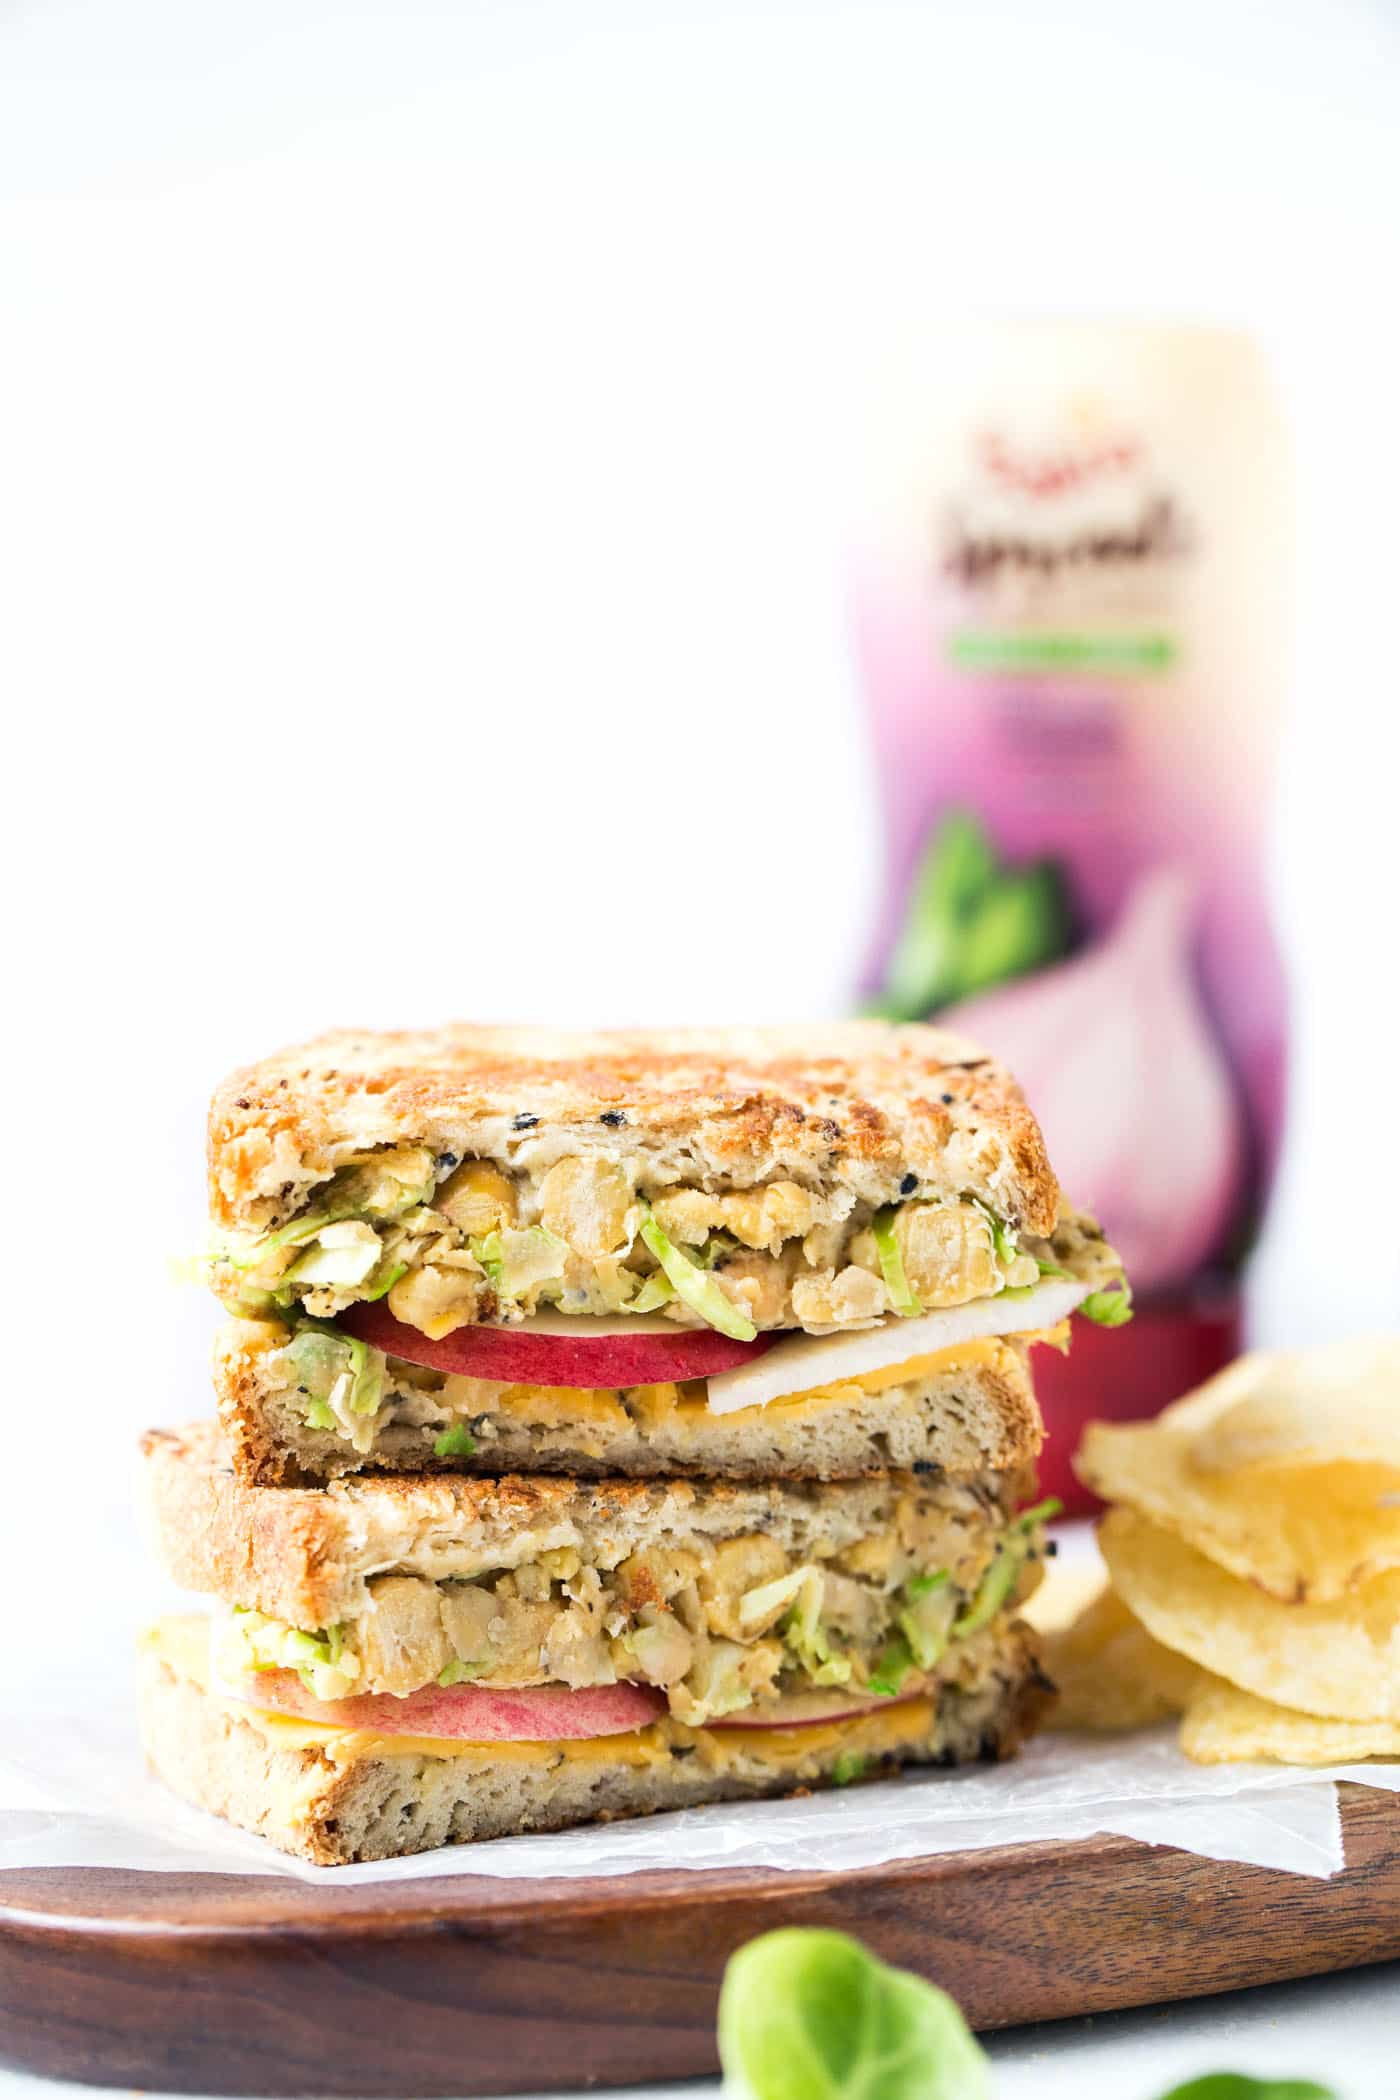 This is hands down THE BEST vegan grilled cheese ever! with brussels sprouts, hummus, apples and more!